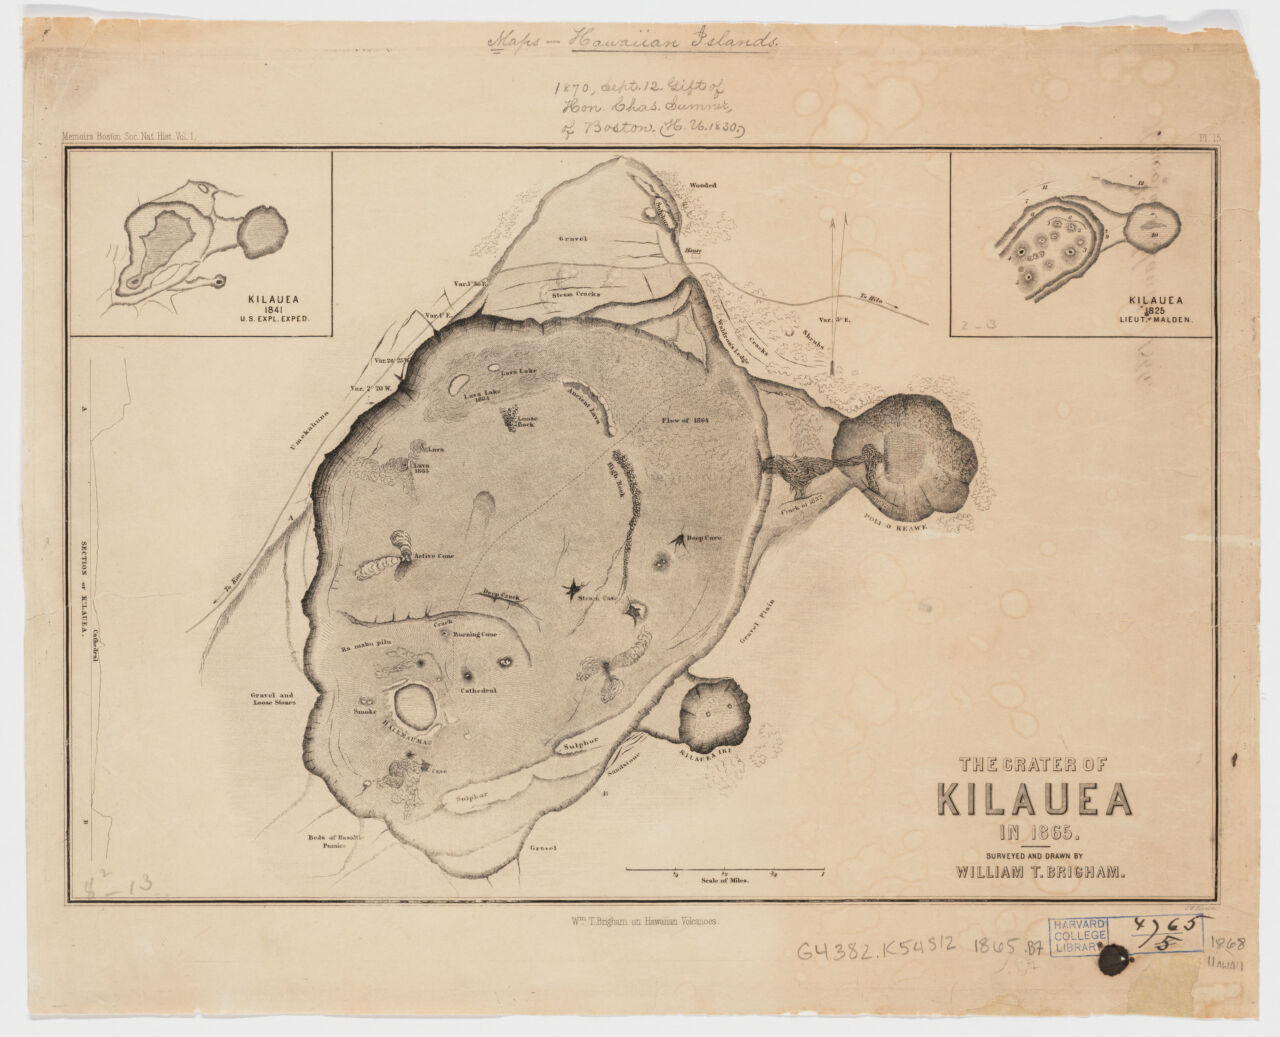 1868 The Crater of Kilauea (Brigham)